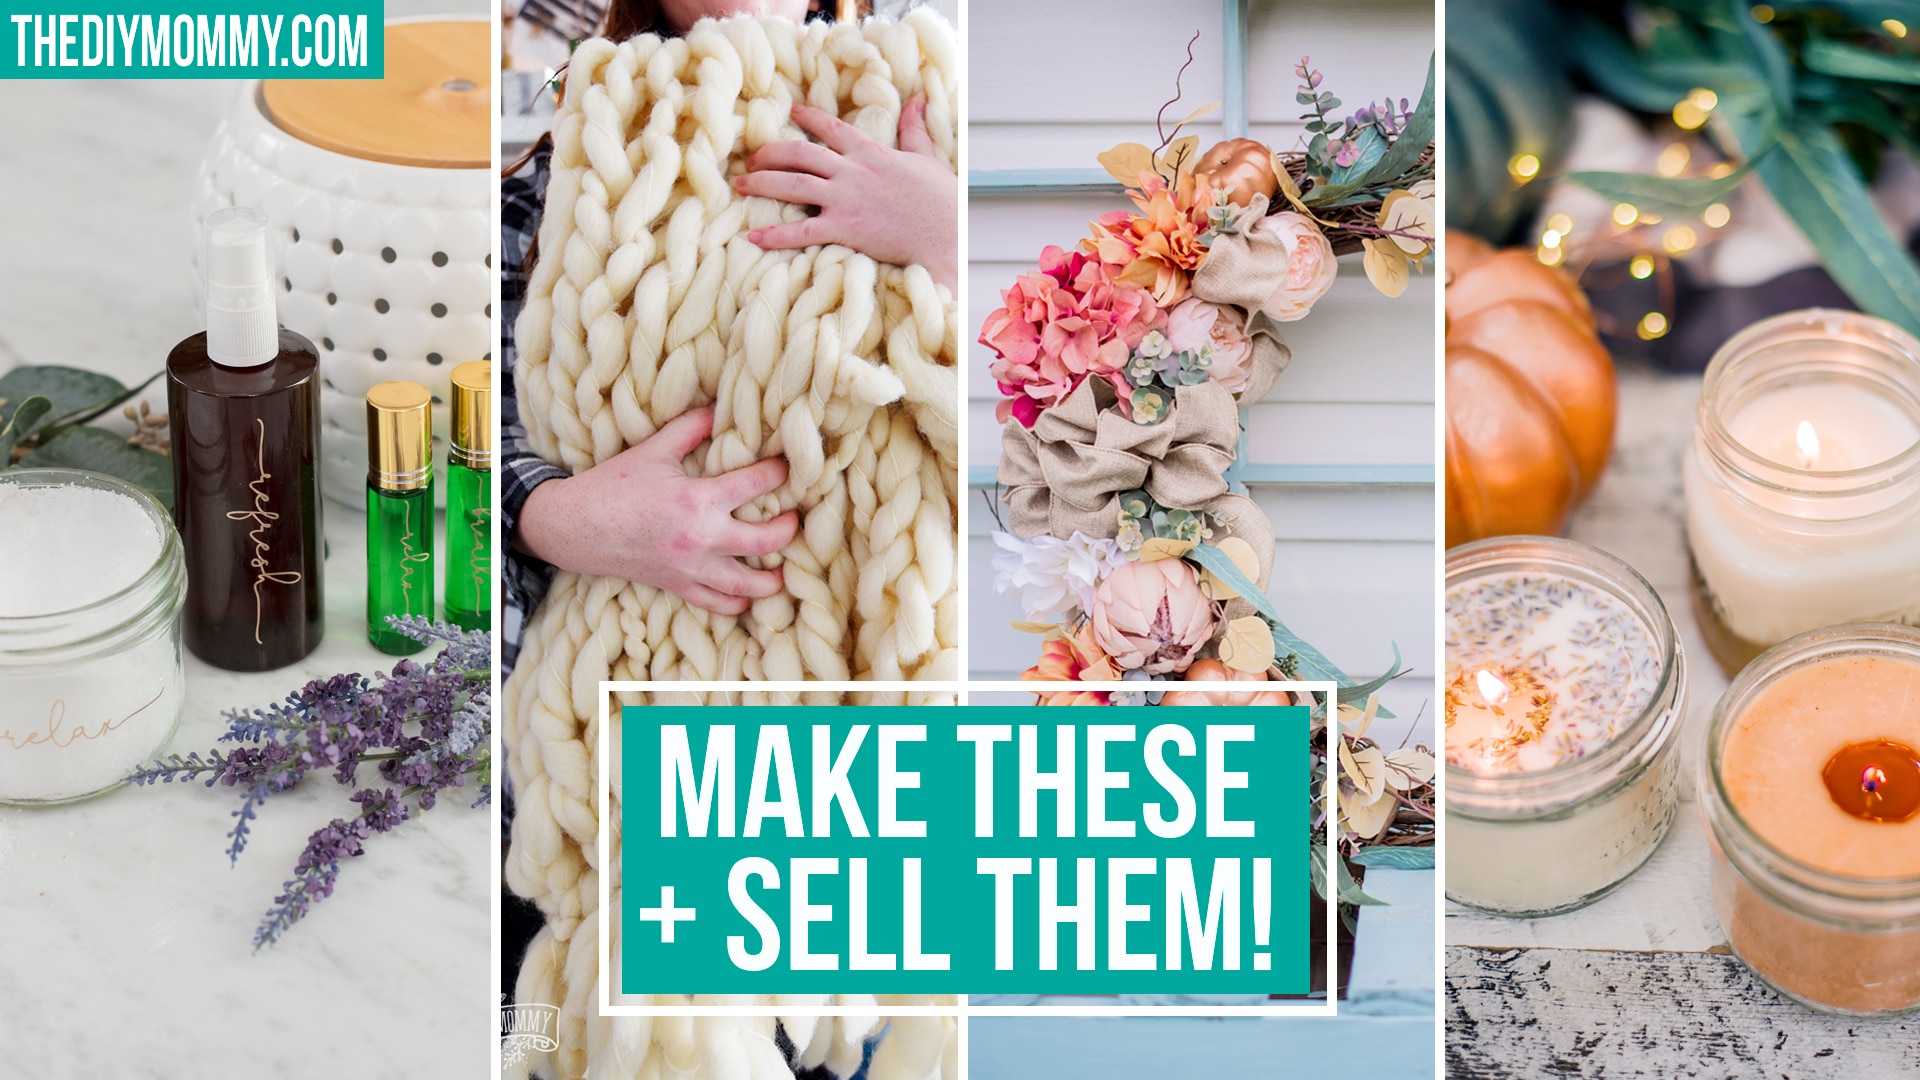 10 Crafts to Make and Sell